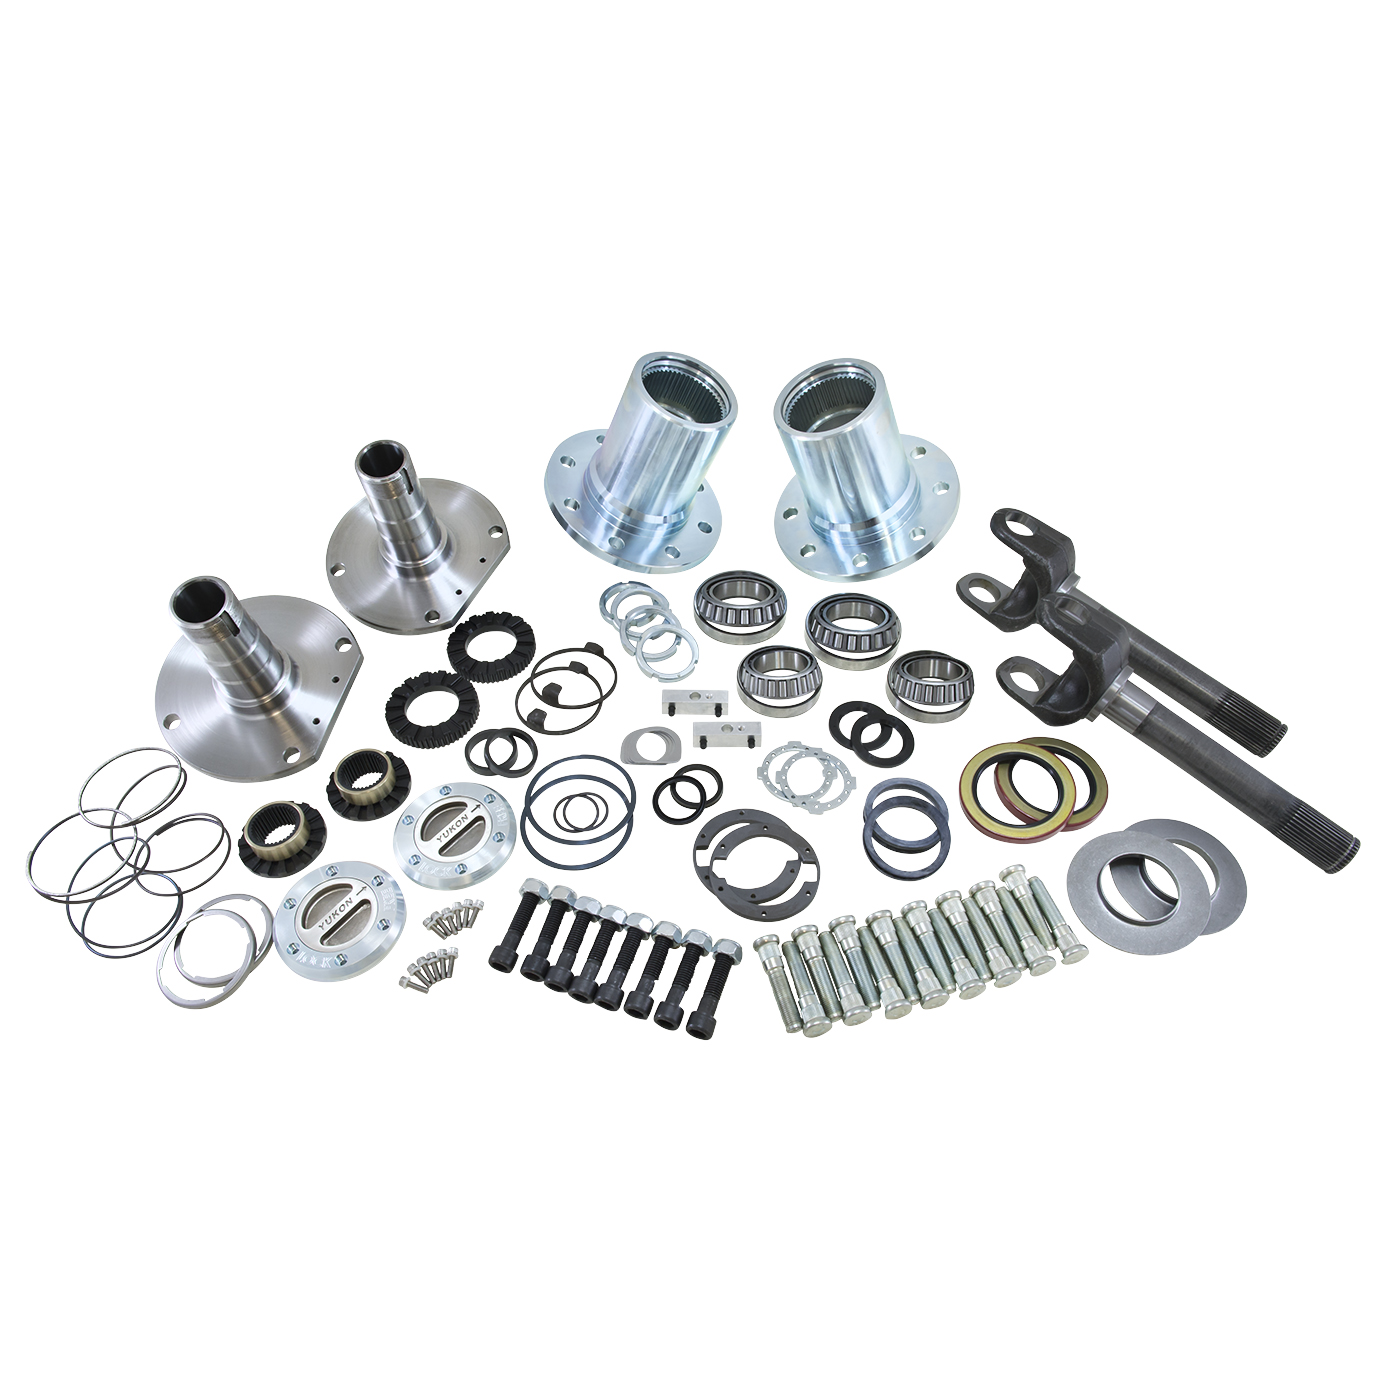 YP WK-001 Small Wiper Kit with 8 Retaining Bolt for Dana Differential Yukon 